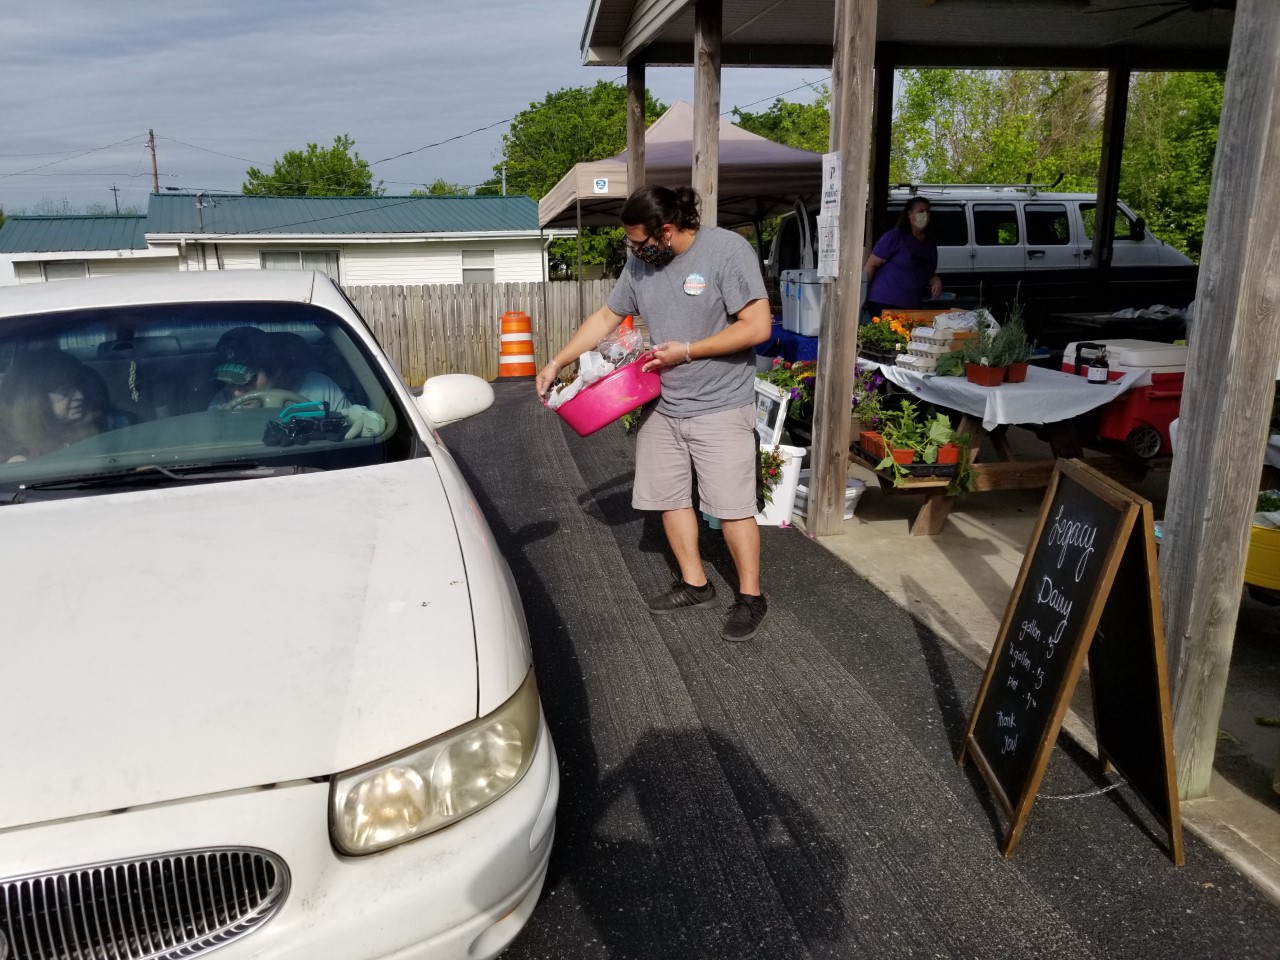 Safety first at the Metcalfe Count Farmers Market. A vendor brings his products to a drive-thru customer. Photo by Lynn Blankenship